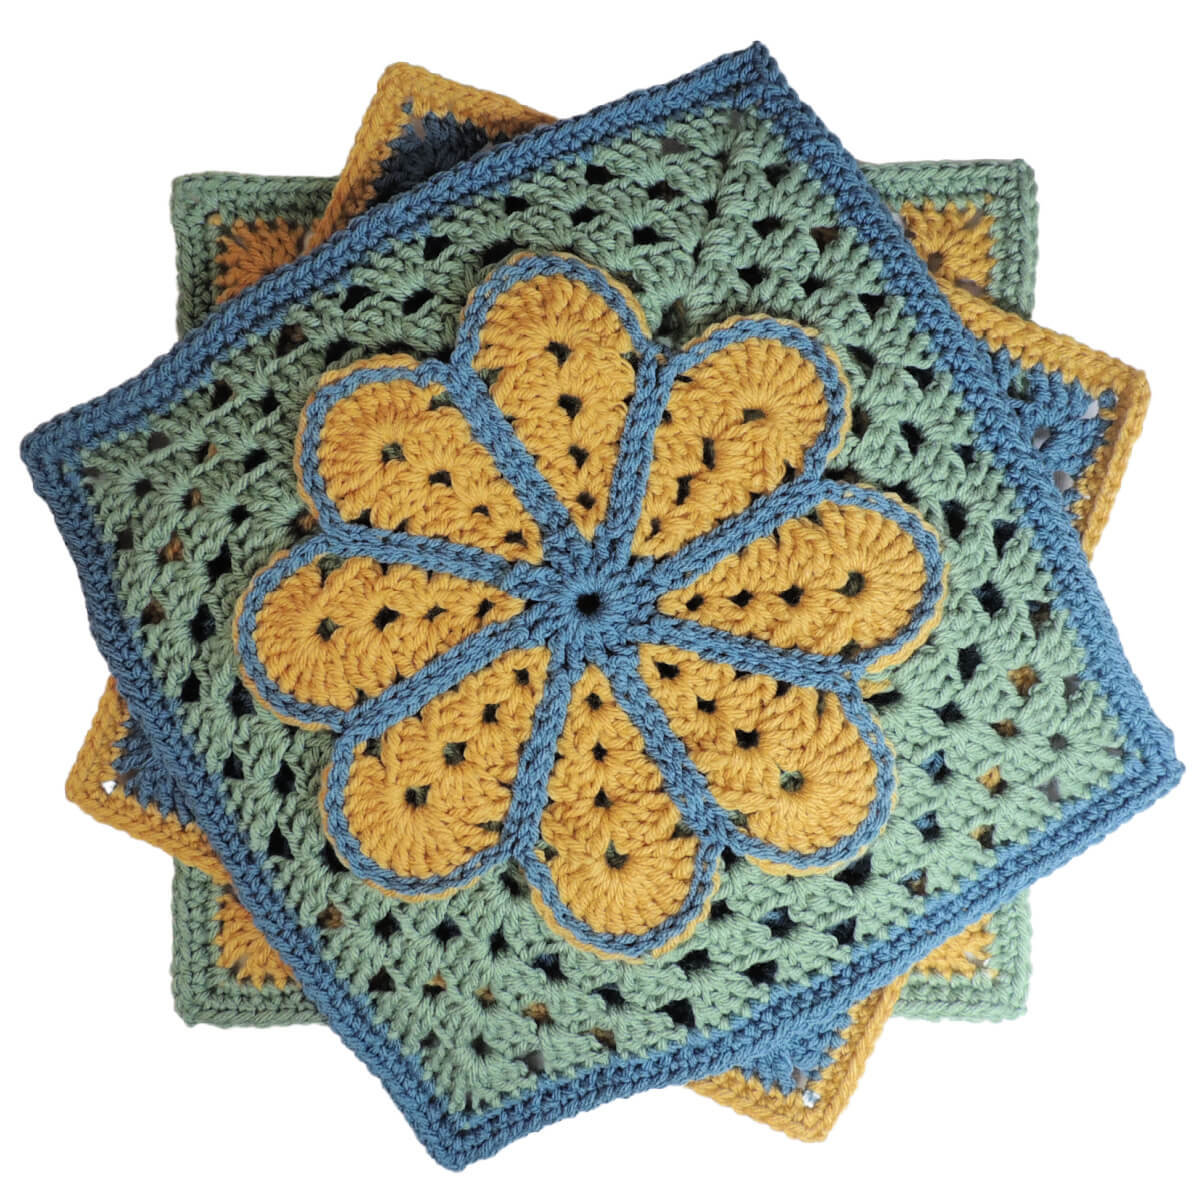 Free Flower Granny Squares Patterns, Easy Designs for Beginners